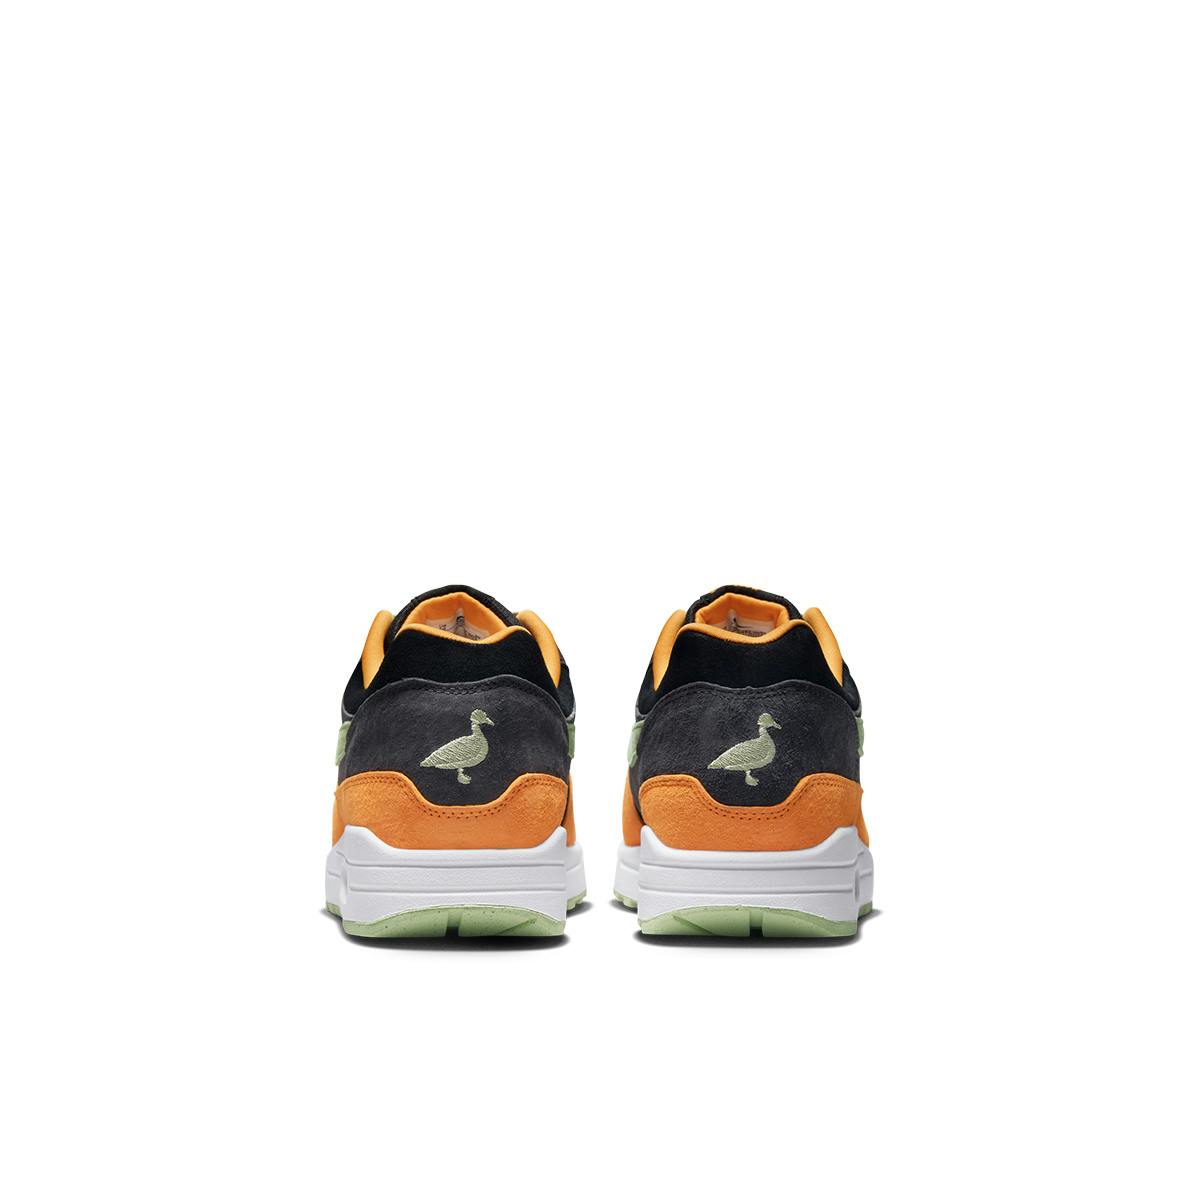 Tacto Sabroso Estricto NIKE AIR MAX 1: A NEW AGE OF THE UGLY DUCKLING | END. (US)